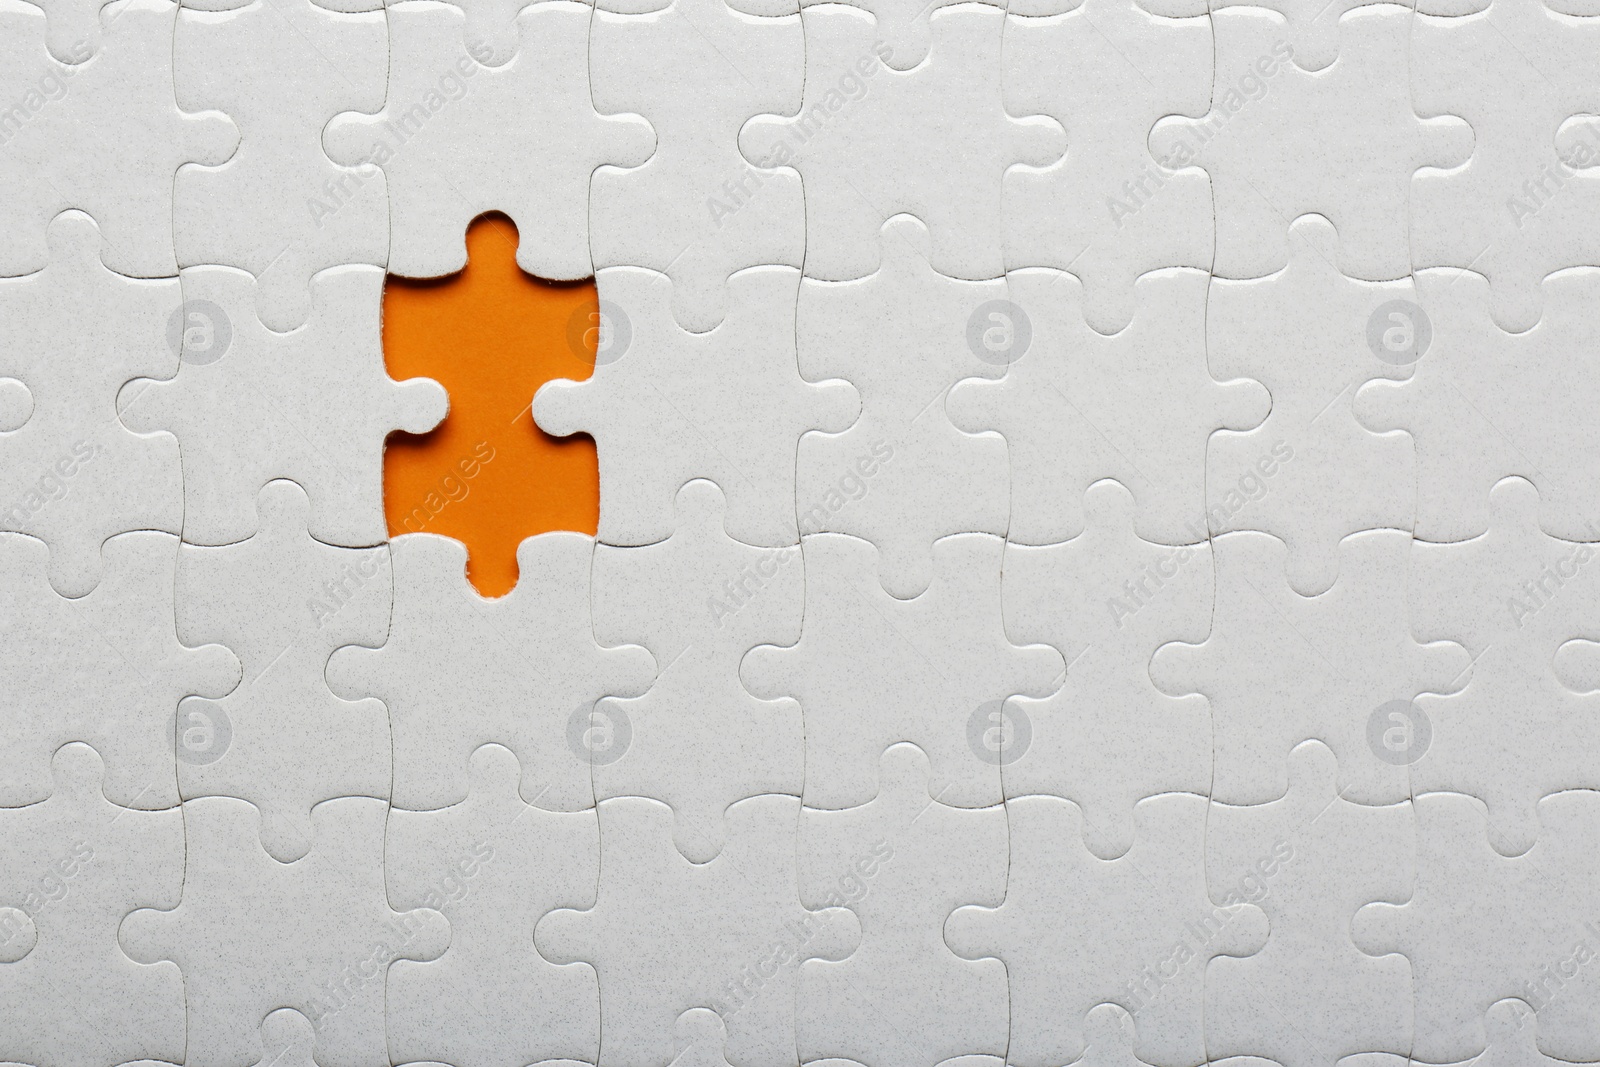 Photo of Recruitment process, searching for best applicant. Assembled jigsaw puzzle pieces with missing one, top view